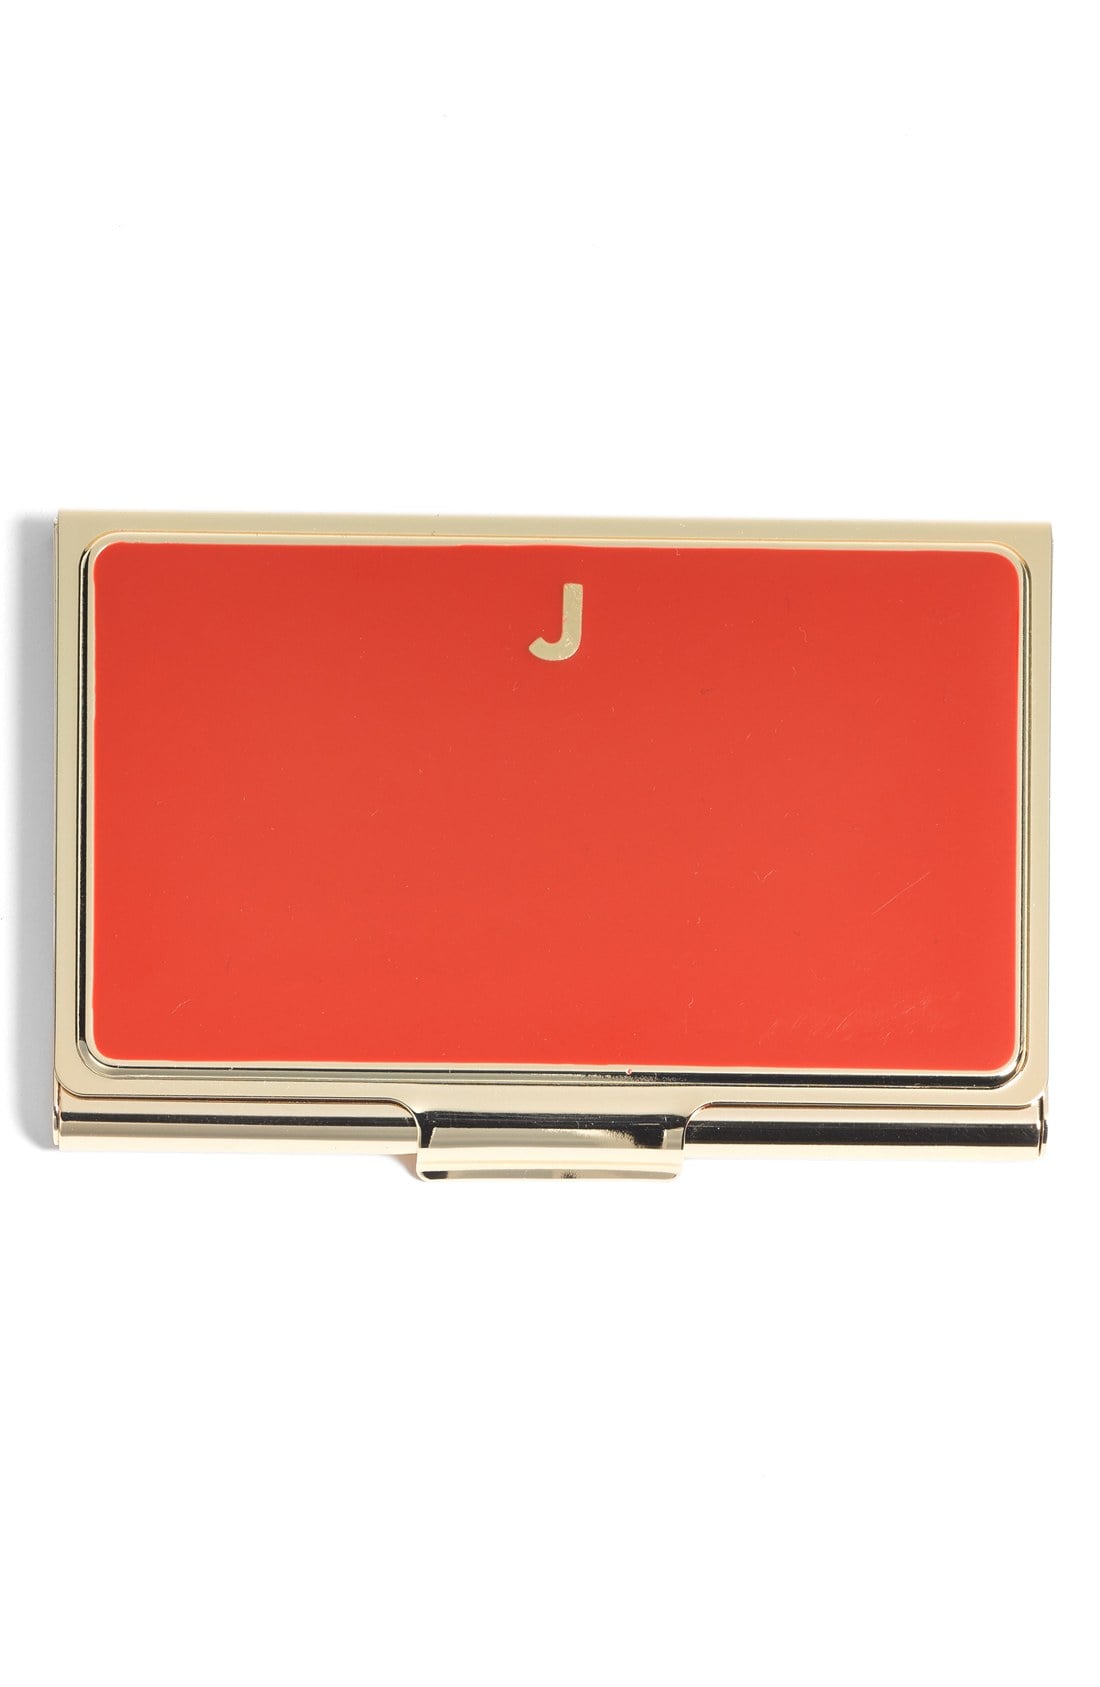 Kate Spade business card holder ($30) | 431 Truly Awesome Fashion Gifts For  Everyone on Your List | POPSUGAR Fashion Photo 266